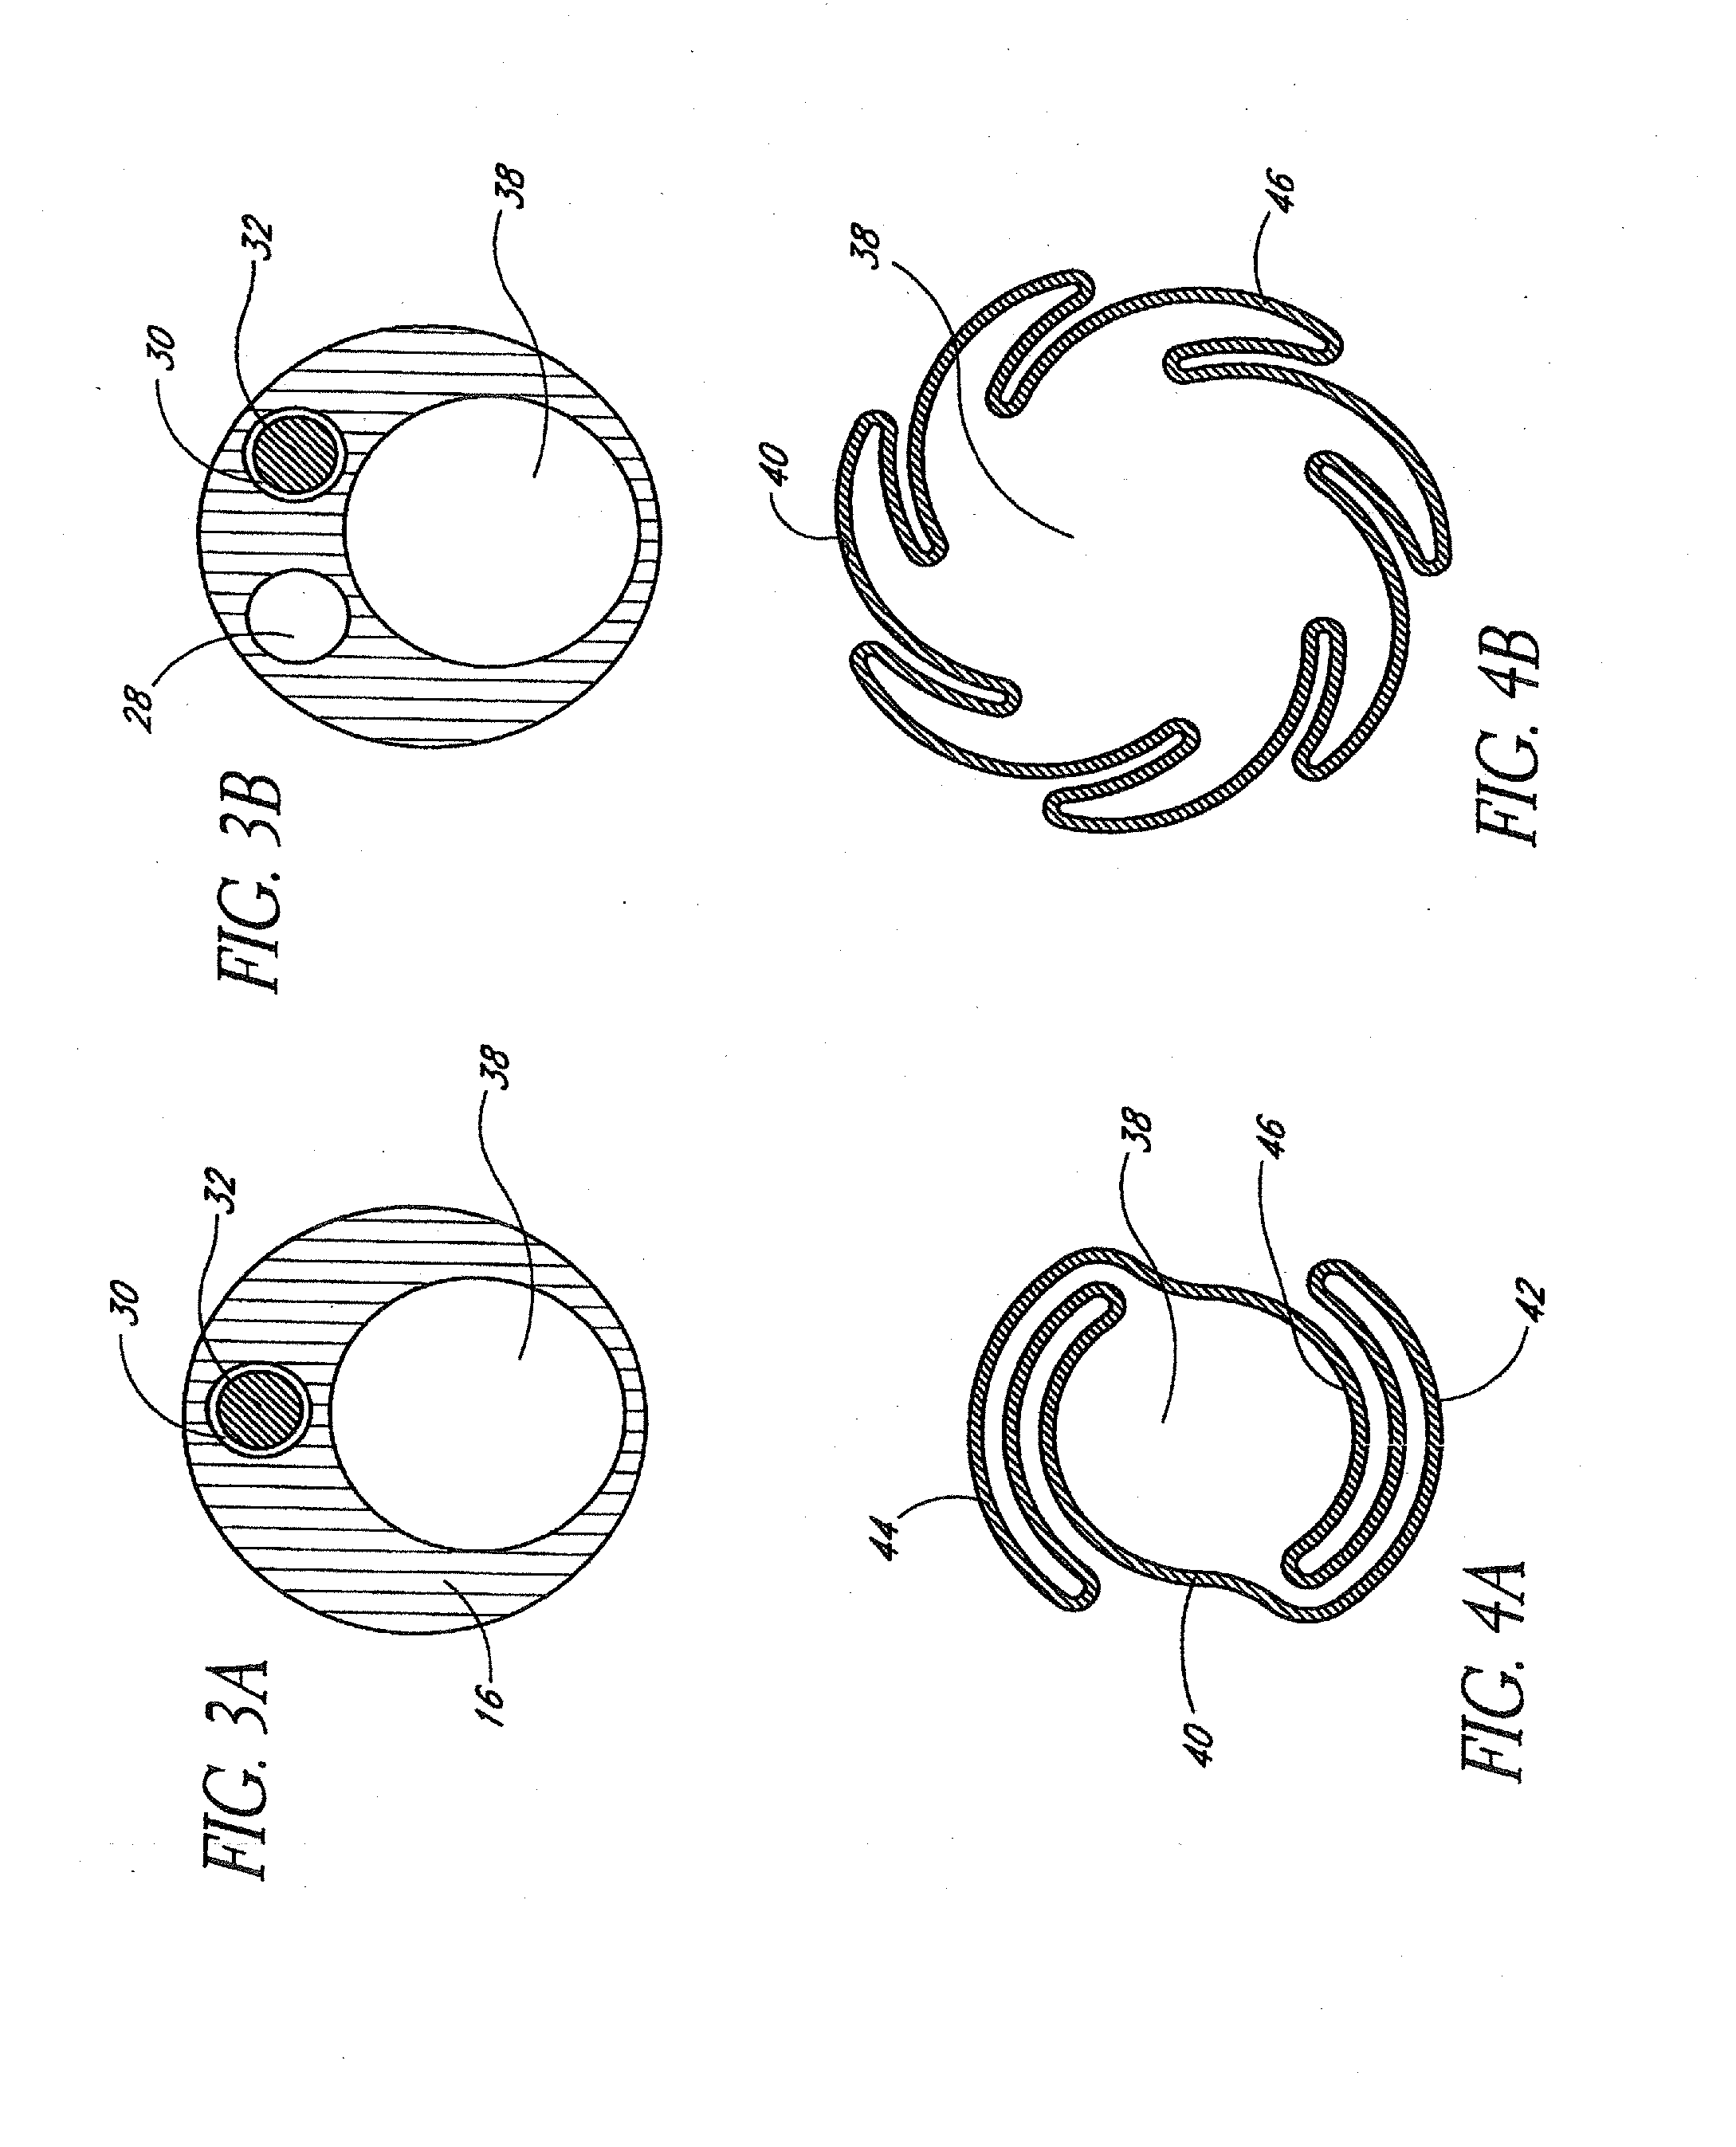 Systems and methods for removing obstructive matter from body lumens and treating vascular defects